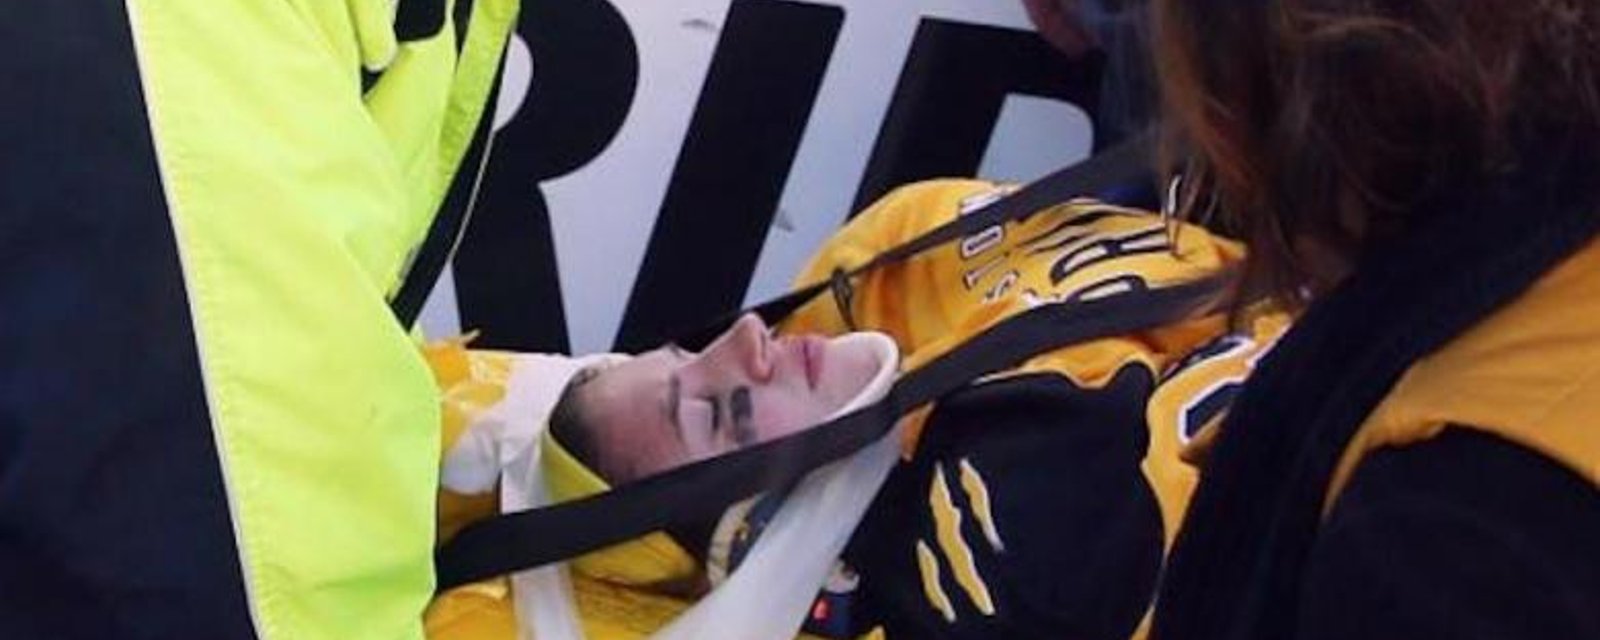 Boston Bruins to donate huge amount of money to Denna Laing.